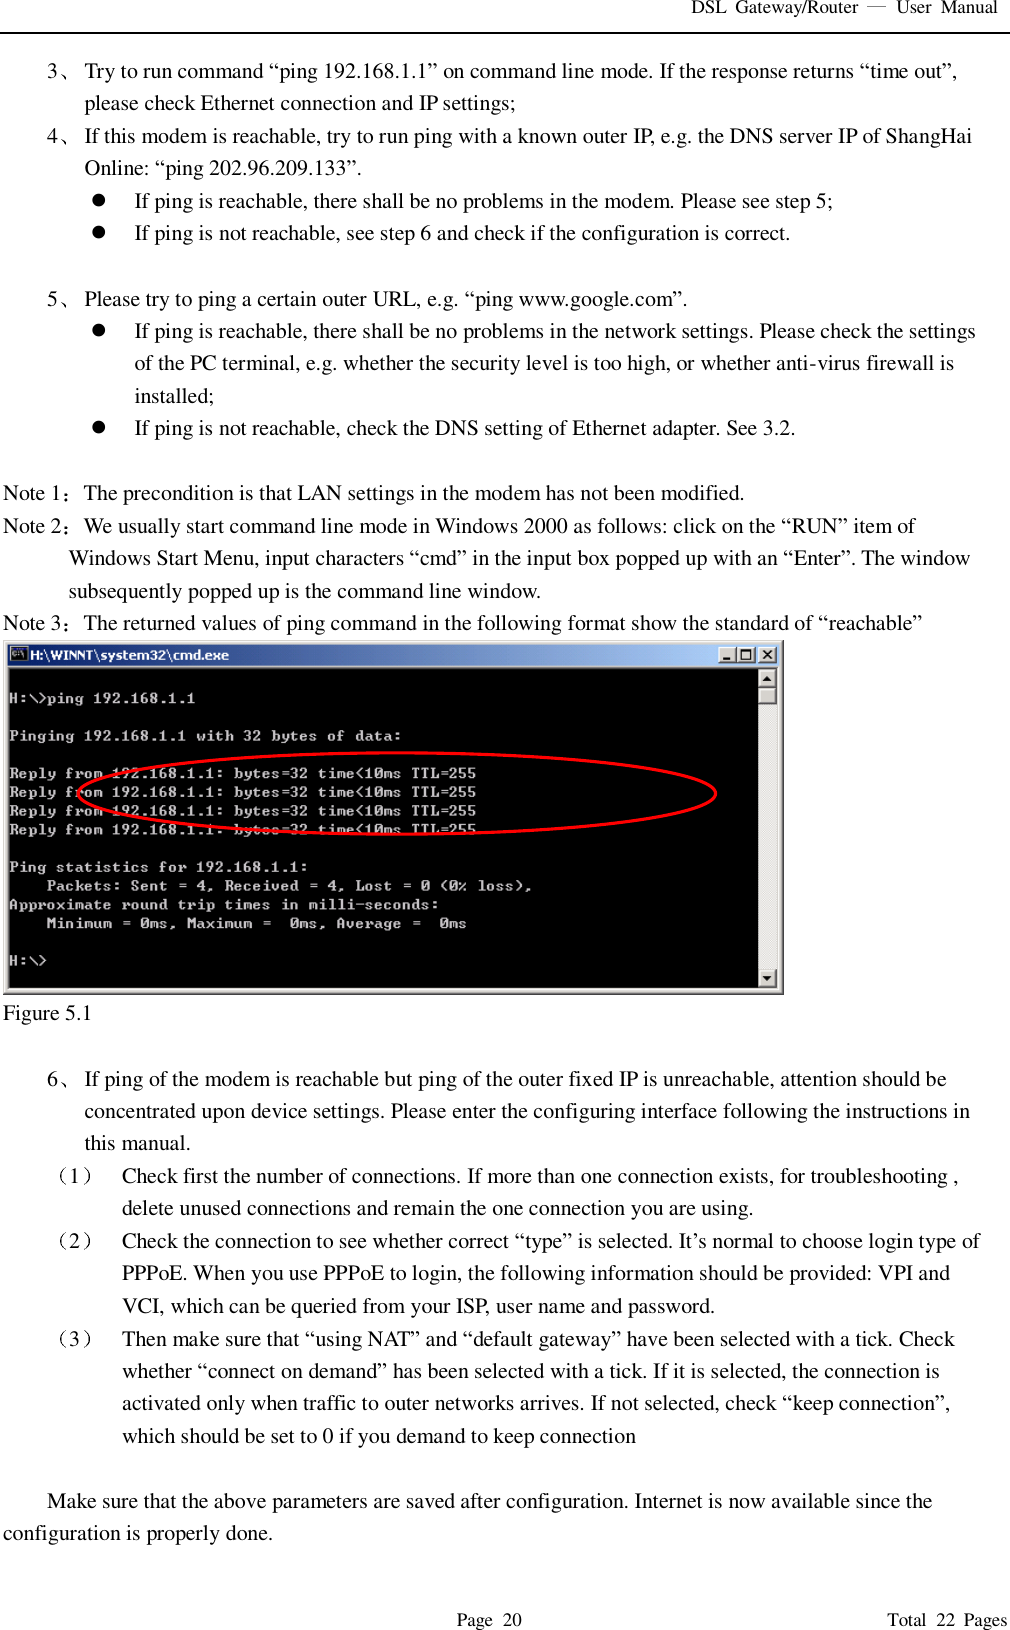 DSL  Gateway/Router    User  Manual   Page  20                                                                              Total  22  Pages 3 Try to run command “ping 192.168.1.1” on command line mode. If the response returns “time out”, please check Ethernet connection and IP settings; 4 If this modem is reachable, try to run ping with a known outer IP, e.g. the DNS server IP of ShangHai Online: “ping 202.96.209.133”.  If ping is reachable, there shall be no problems in the modem. Please see step 5;  If ping is not reachable, see step 6 and check if the configuration is correct.  5 Please try to ping a certain outer URL, e.g. “ping www.google.com”.  If ping is reachable, there shall be no problems in the network settings. Please check the settings of the PC terminal, e.g. whether the security level is too high, or whether anti-virus firewall is installed;  If ping is not reachable, check the DNS setting of Ethernet adapter. See 3.2.  Note 1 The precondition is that LAN settings in the modem has not been modified. Note 2 We usually start command line mode in Windows 2000 as follows: click on the “RUN” item of Windows Start Menu, input characters “cmd” in the input box popped up with an “Enter”. The window subsequently popped up is the command line window. Note 3 The returned values of ping command in the following format show the standard of “reachable”  Figure 5.1  6 If ping of the modem is reachable but ping of the outer fixed IP is unreachable, attention should be concentrated upon device settings. Please enter the configuring interface following the instructions in this manual. 1 Check first the number of connections. If more than one connection exists, for troubleshooting , delete unused connections and remain the one connection you are using. 2 Check the connection to see whether correct “type” is selected. It’s normal to choose login type of PPPoE. When you use PPPoE to login, the following information should be provided: VPI and VCI, which can be queried from your ISP, user name and password. 3 Then make sure that “using NAT” and “default gateway” have been selected with a tick. Check whether “connect on demand” has been selected with a tick. If it is selected, the connection is activated only when traffic to outer networks arrives. If not selected, check “keep connection”, which should be set to 0 if you demand to keep connection  Make sure that the above parameters are saved after configuration. Internet is now available since the configuration is properly done. 